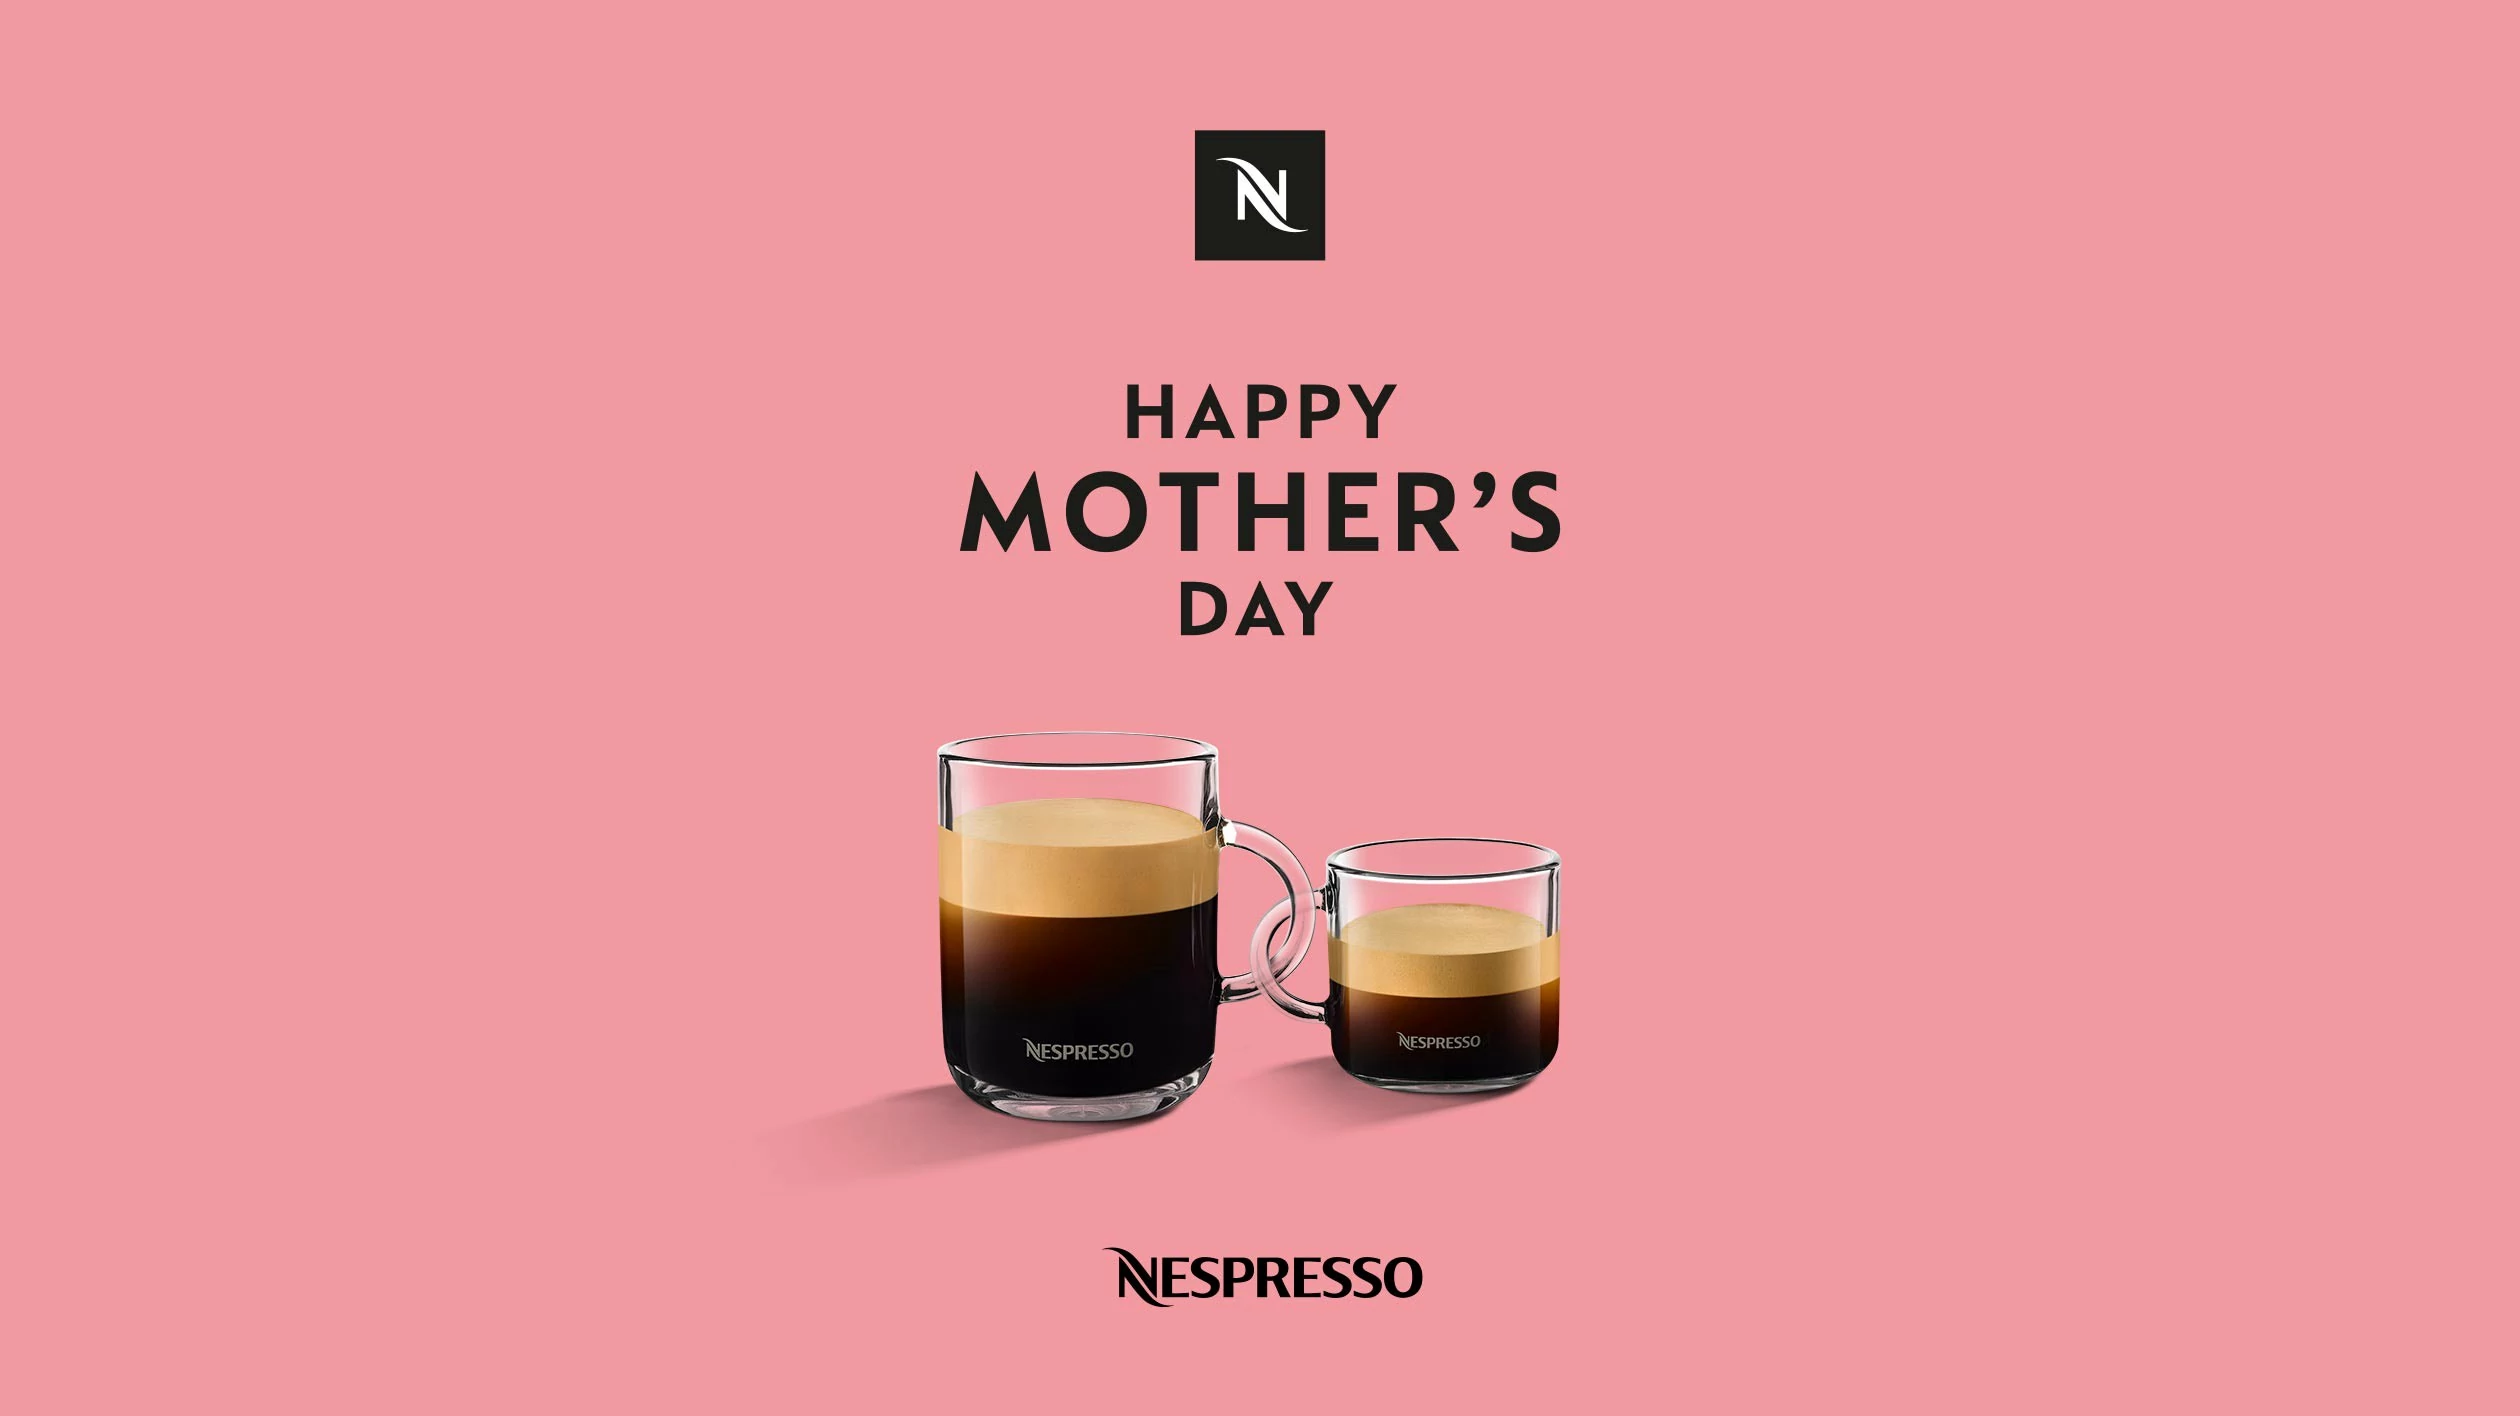 Two Nespresso coffee cups in front of a monochrome background. The handles of the cups are intertwined. "Happy Mother's Day" is written above the cups.